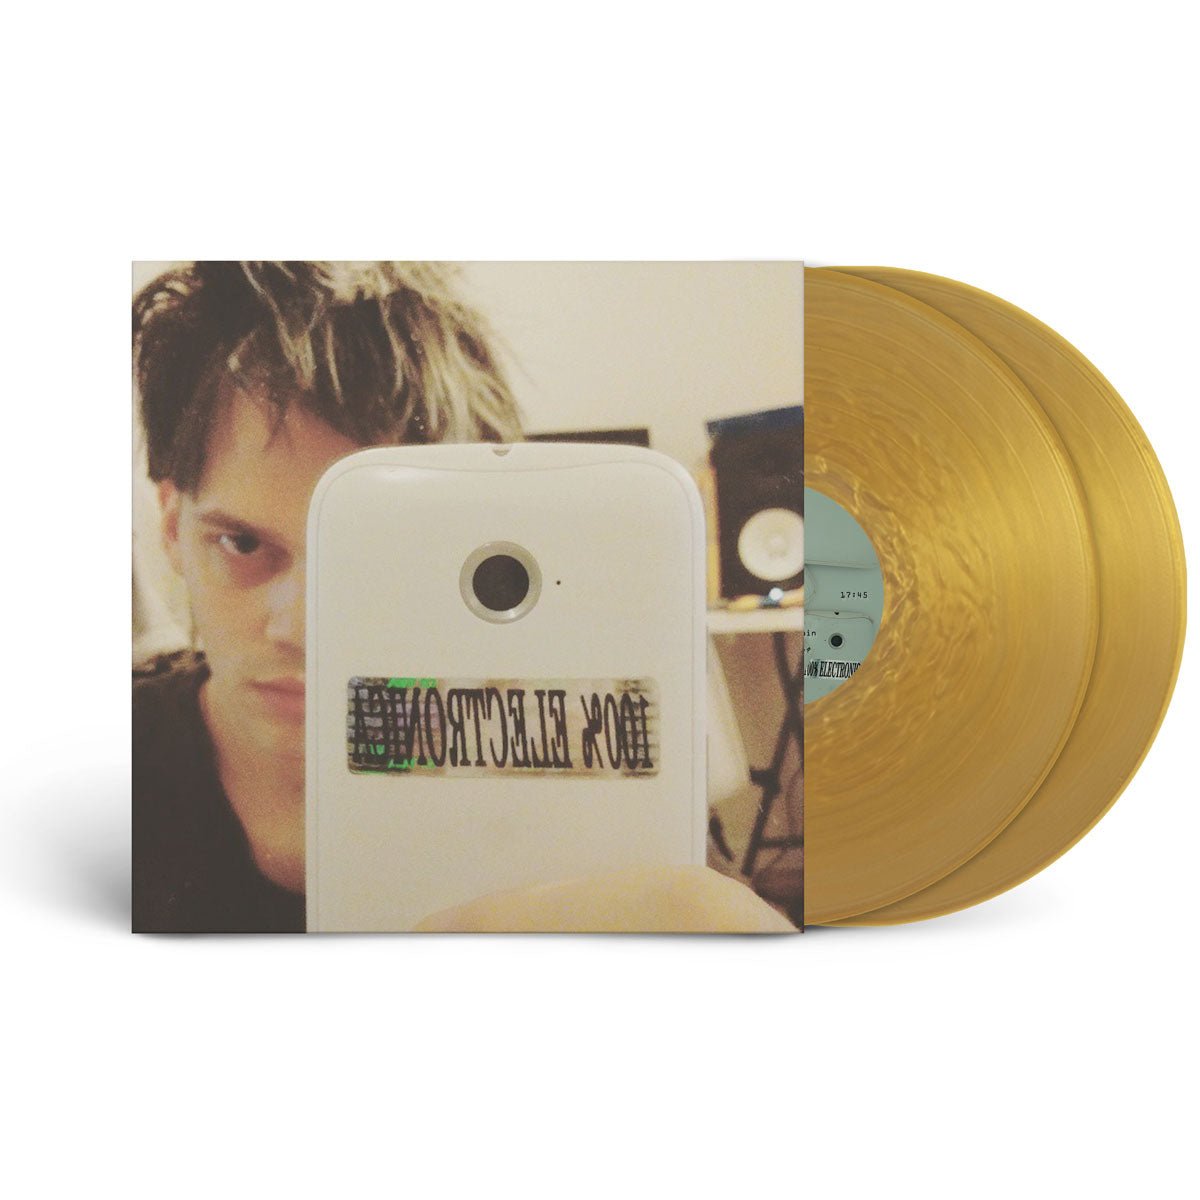 George Clanton Fan Club - 100% Electronica 2xLP [5 Year Anniversary Deluxe Gold Fan Club Exclusive] - 100% Electronica Official Store (Photo 1)